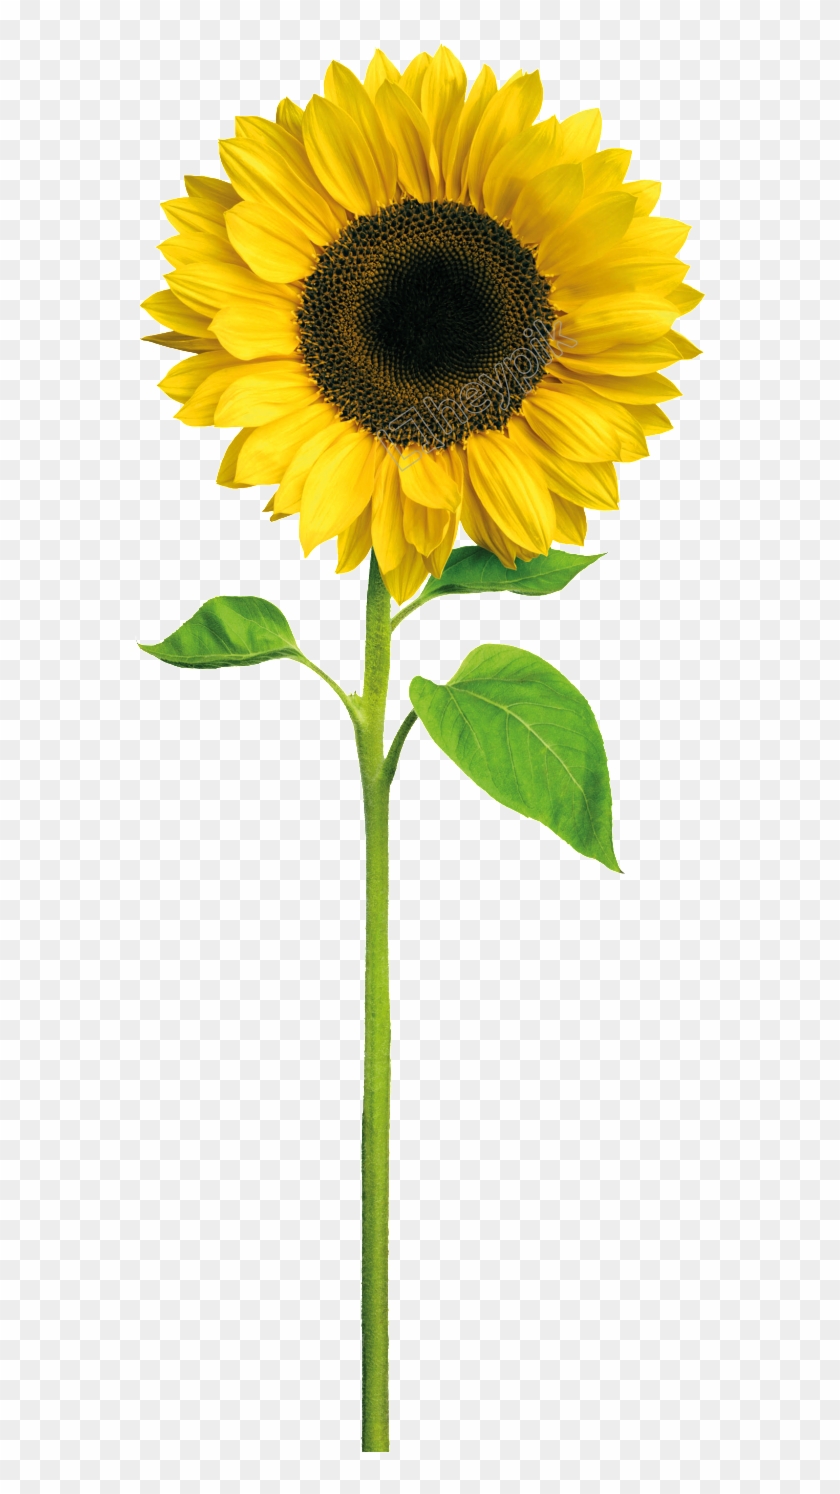 Download Sunflower Vector Image at Vectorified.com | Collection of ...